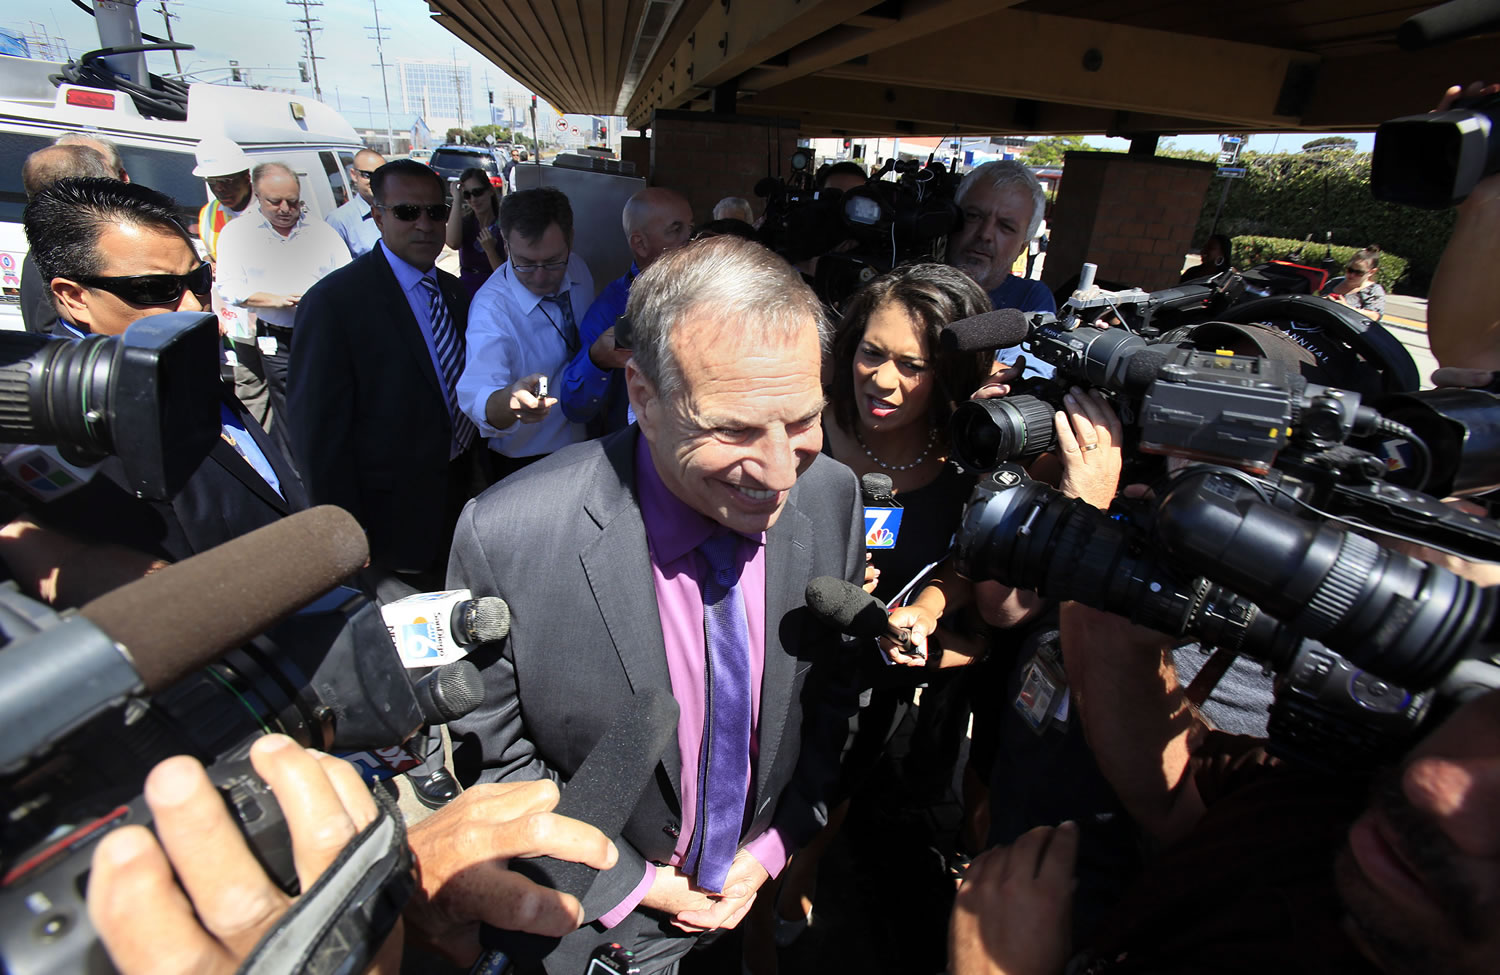 Mayor Bob Filner appears at an event announcing the final phase of a $660 million Trolley Renewal project in San Diego on Thursday.